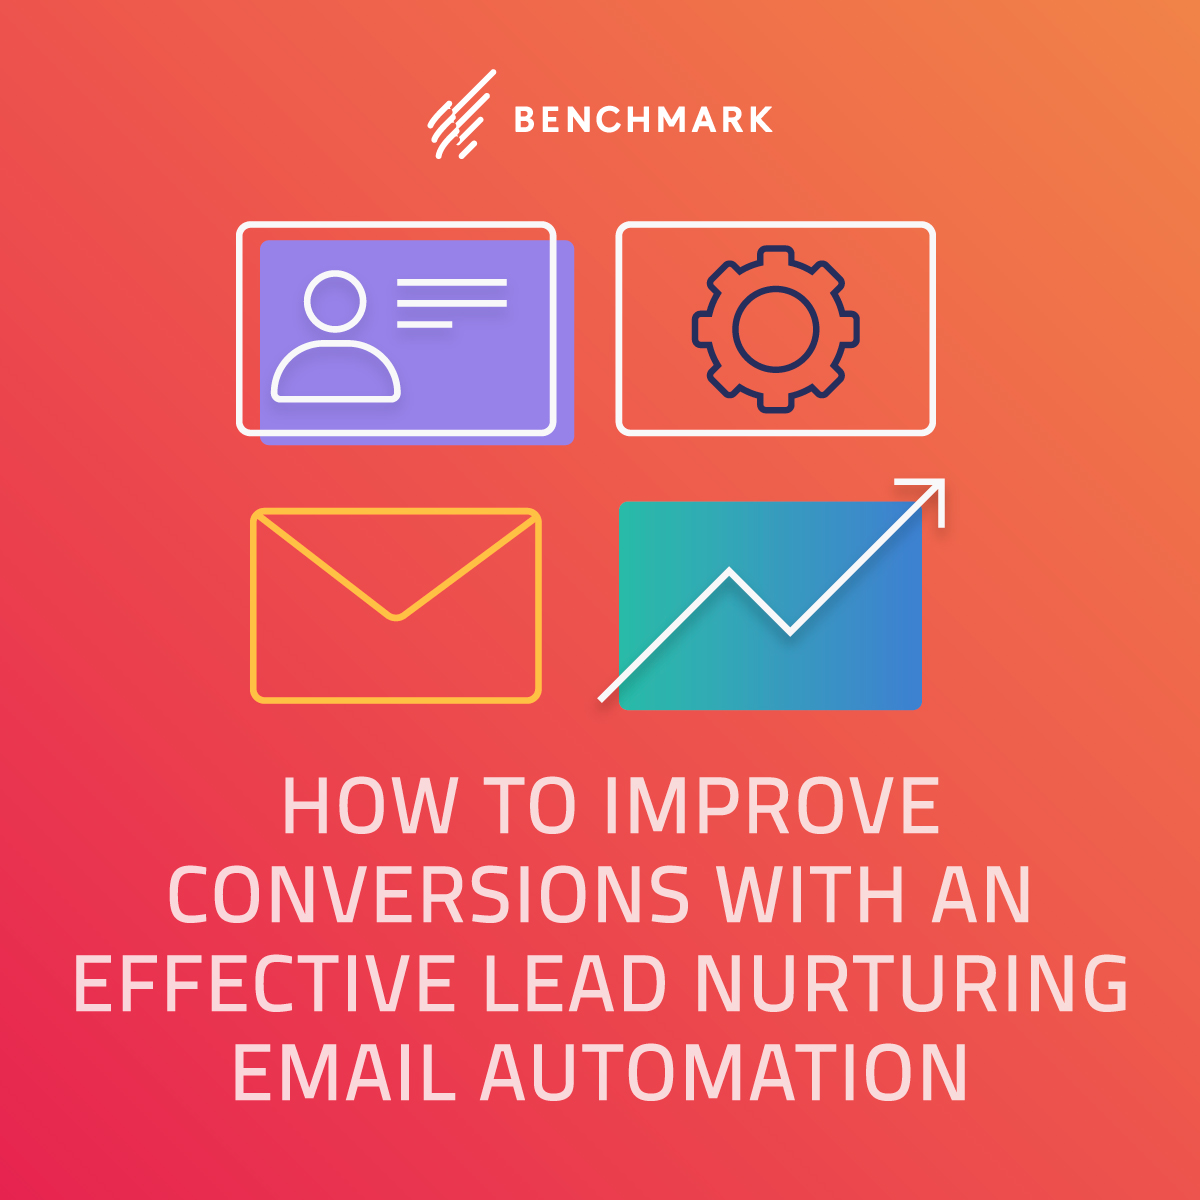 How To Improve Conversions With An Effective Lead Nurturing Email Automation